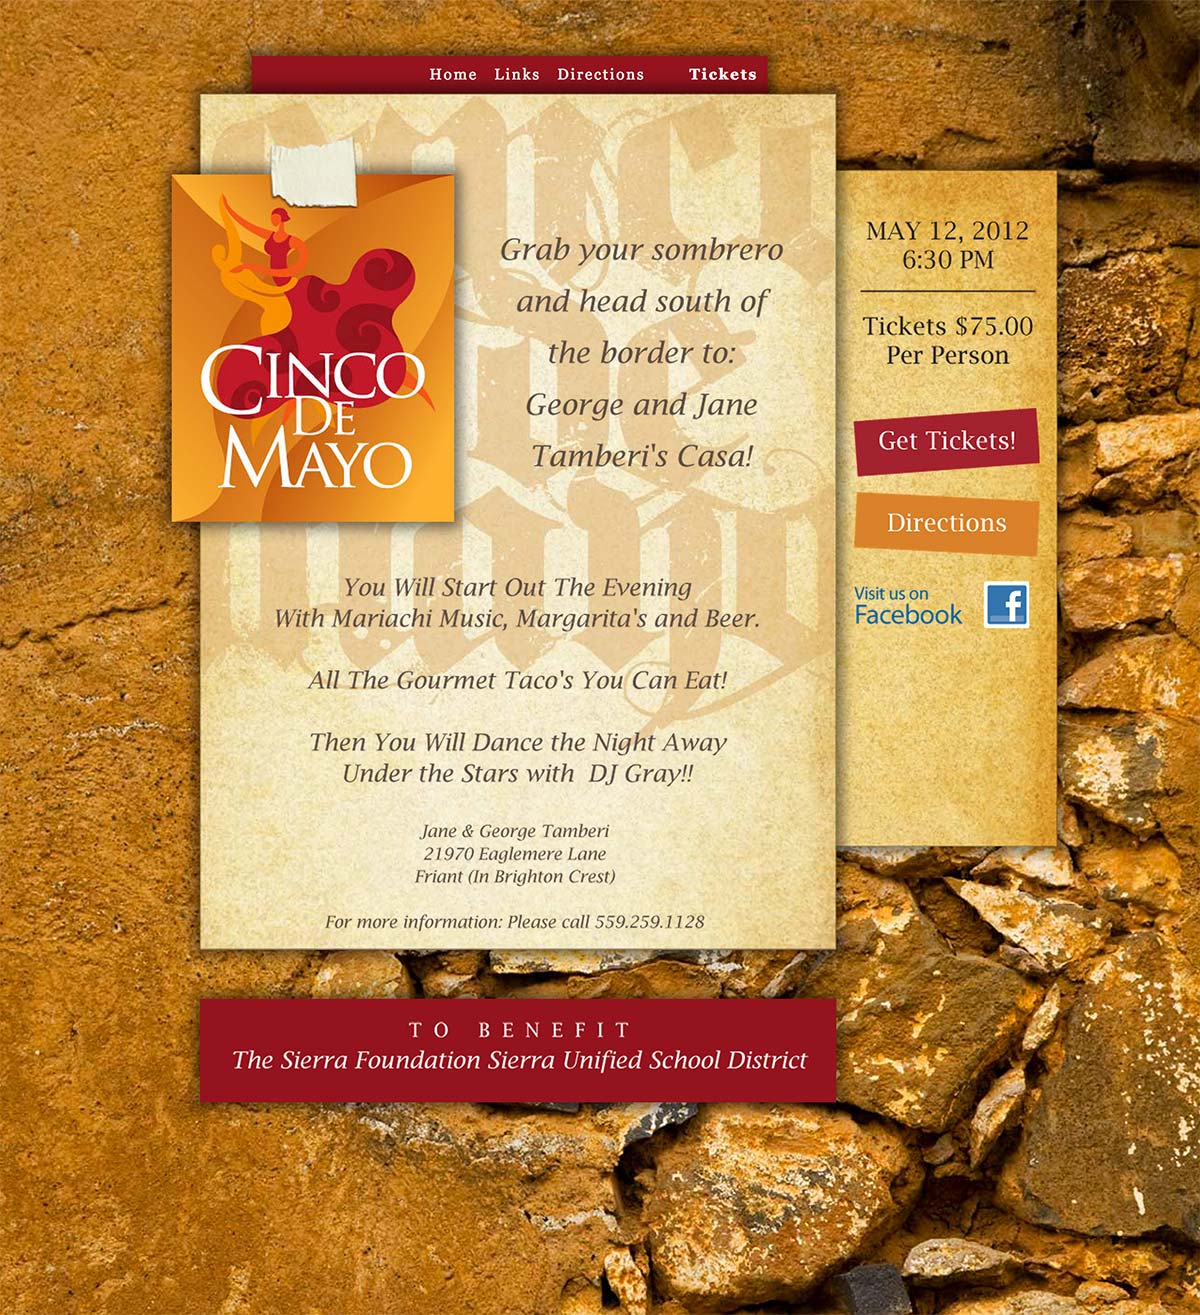 Screen shot of the The Cinco de Mayo web site by Lee Powers.